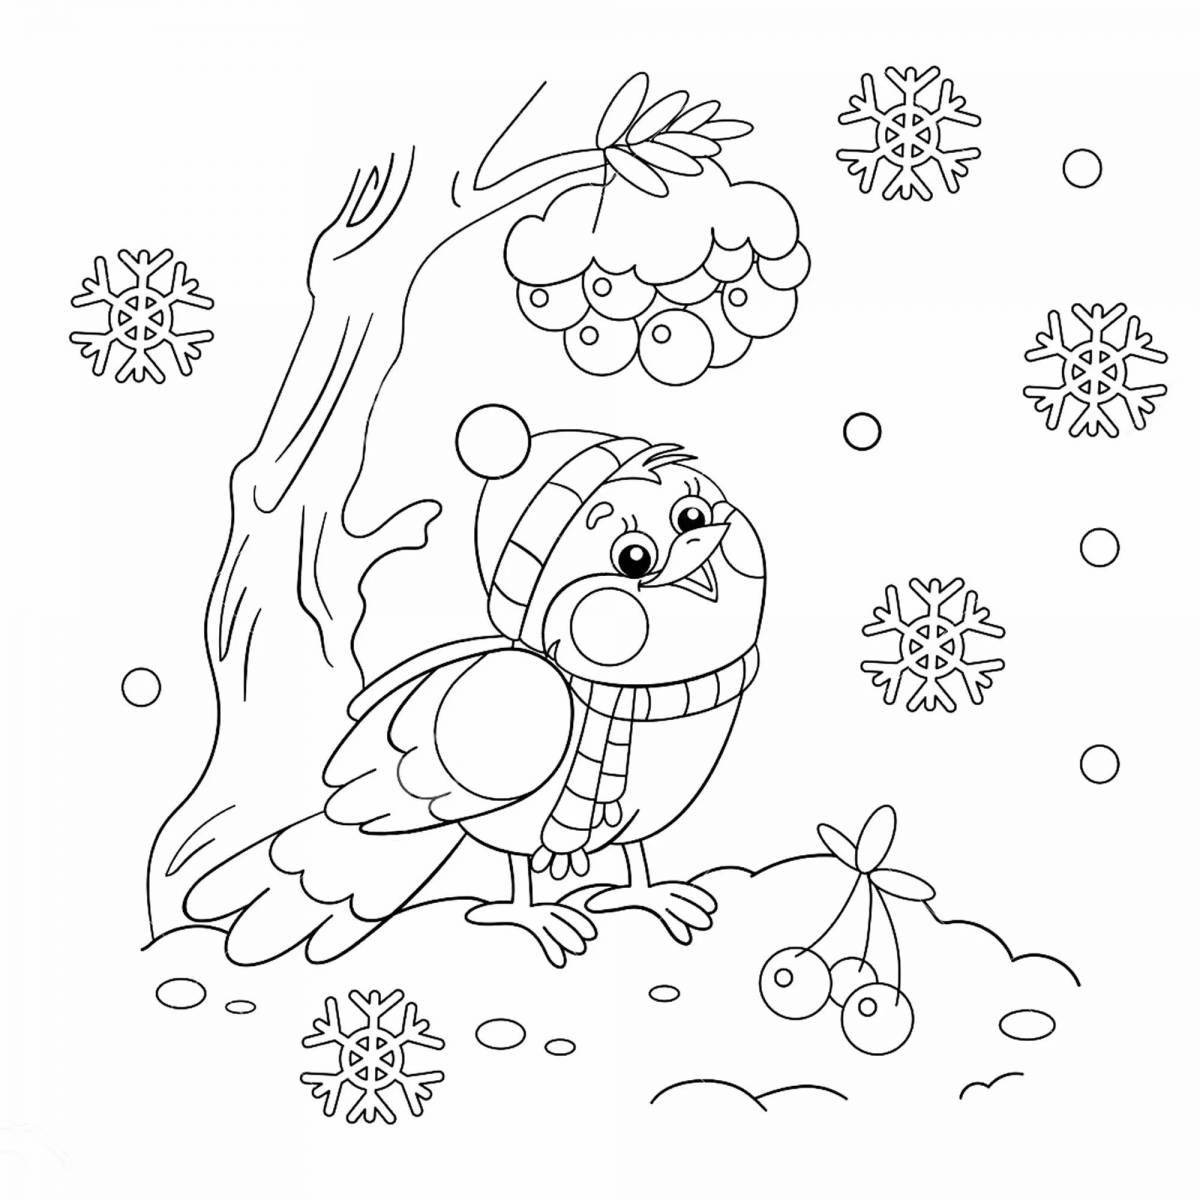 Large winter birds coloring page for 3-4 year olds